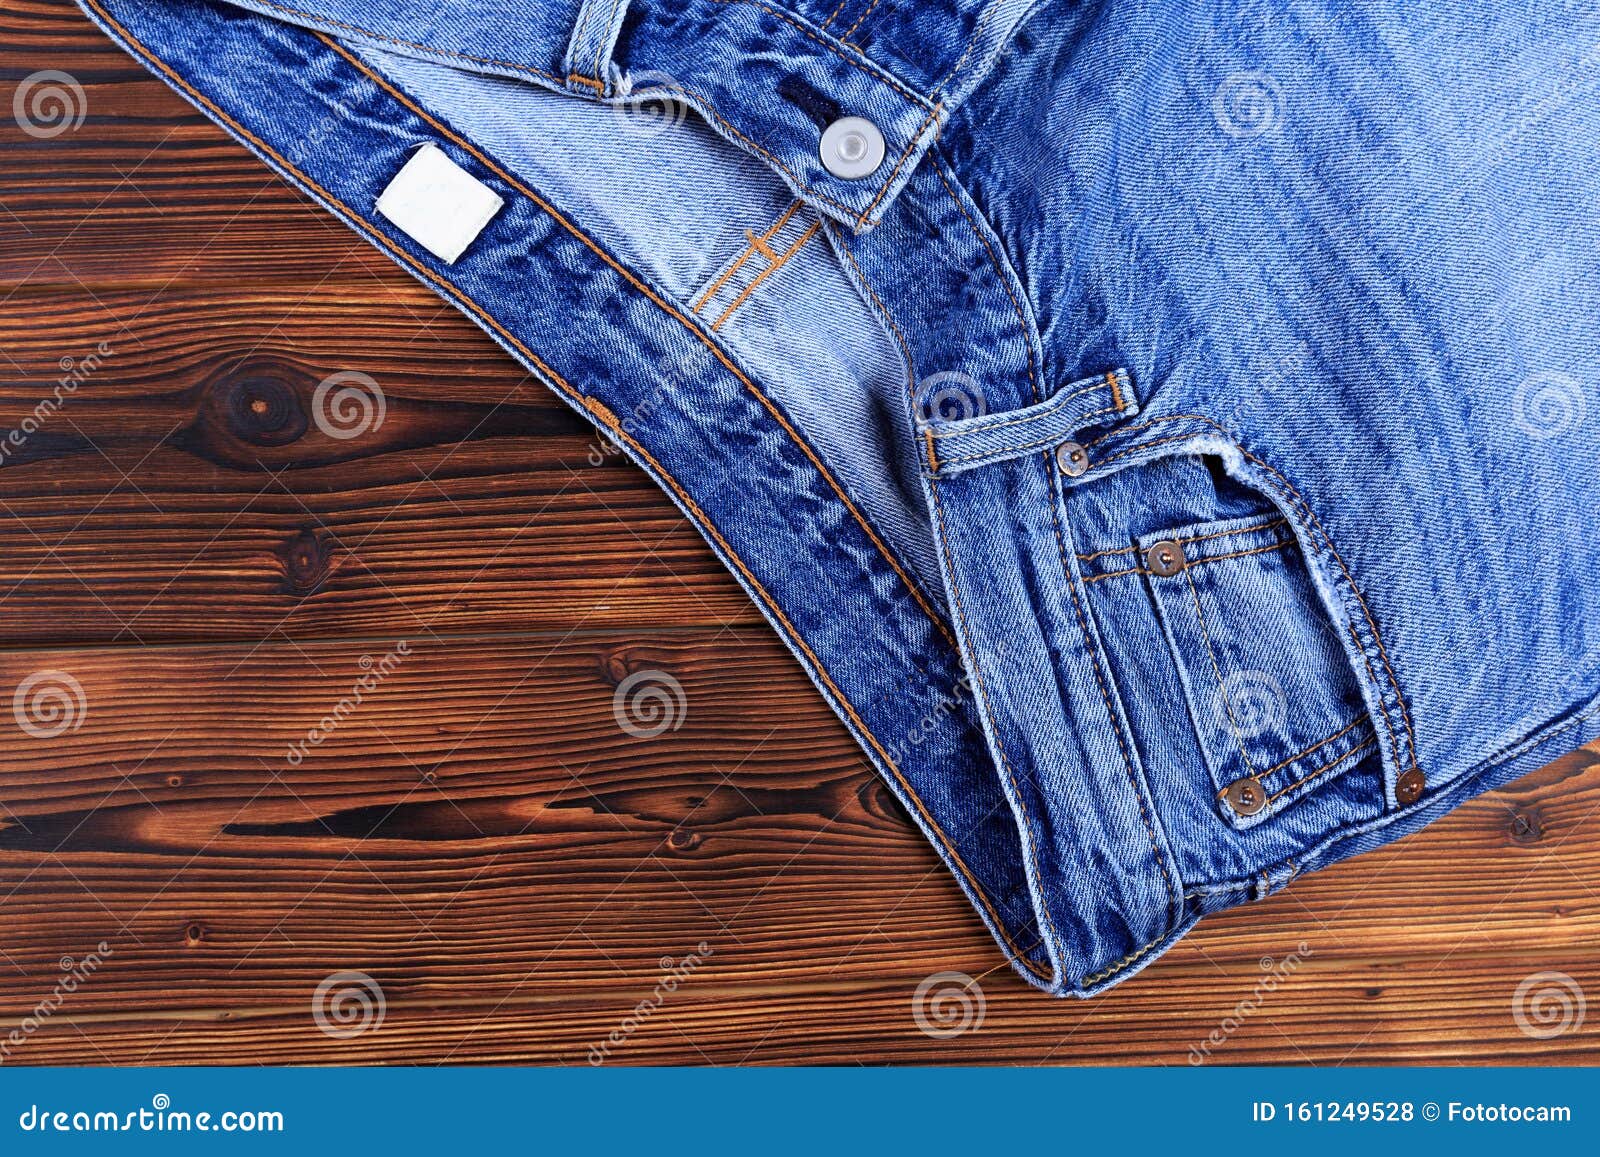 Blue Denim Jeans on Wooden Background Stock Photo - Image of fashion ...